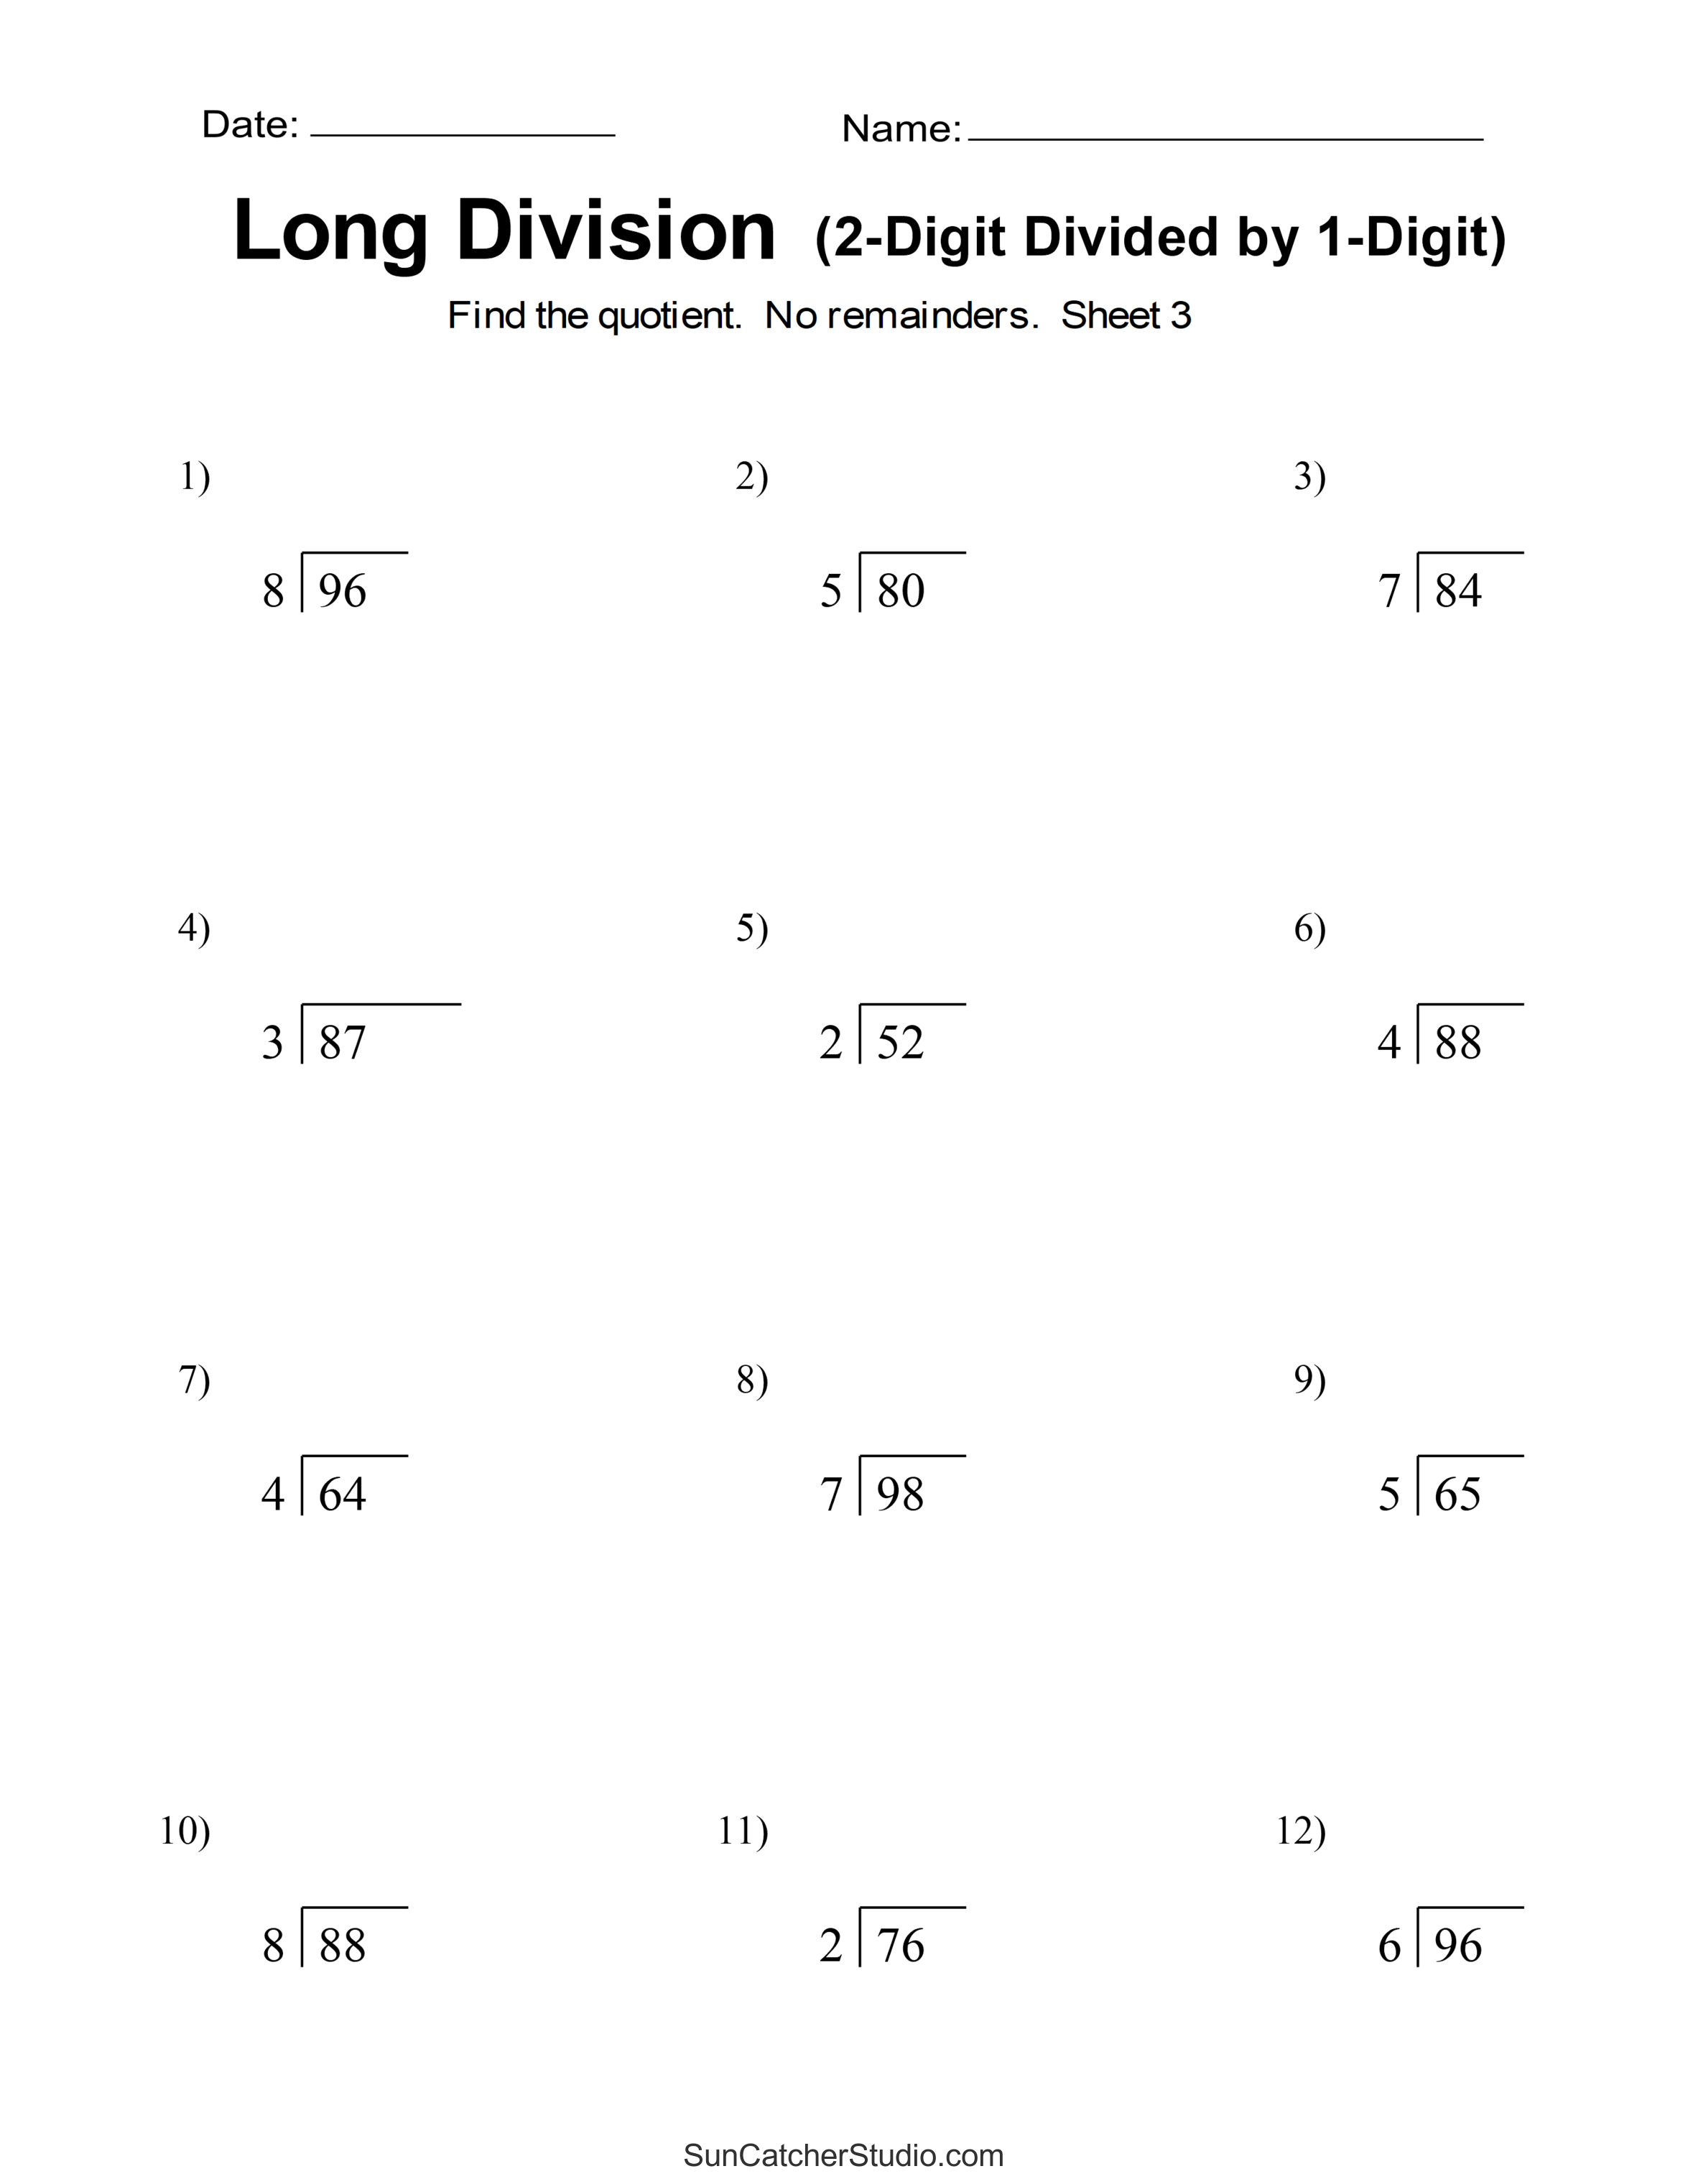 long-division-worksheets-problems-free-printable-math-drills-diy-projects-patterns